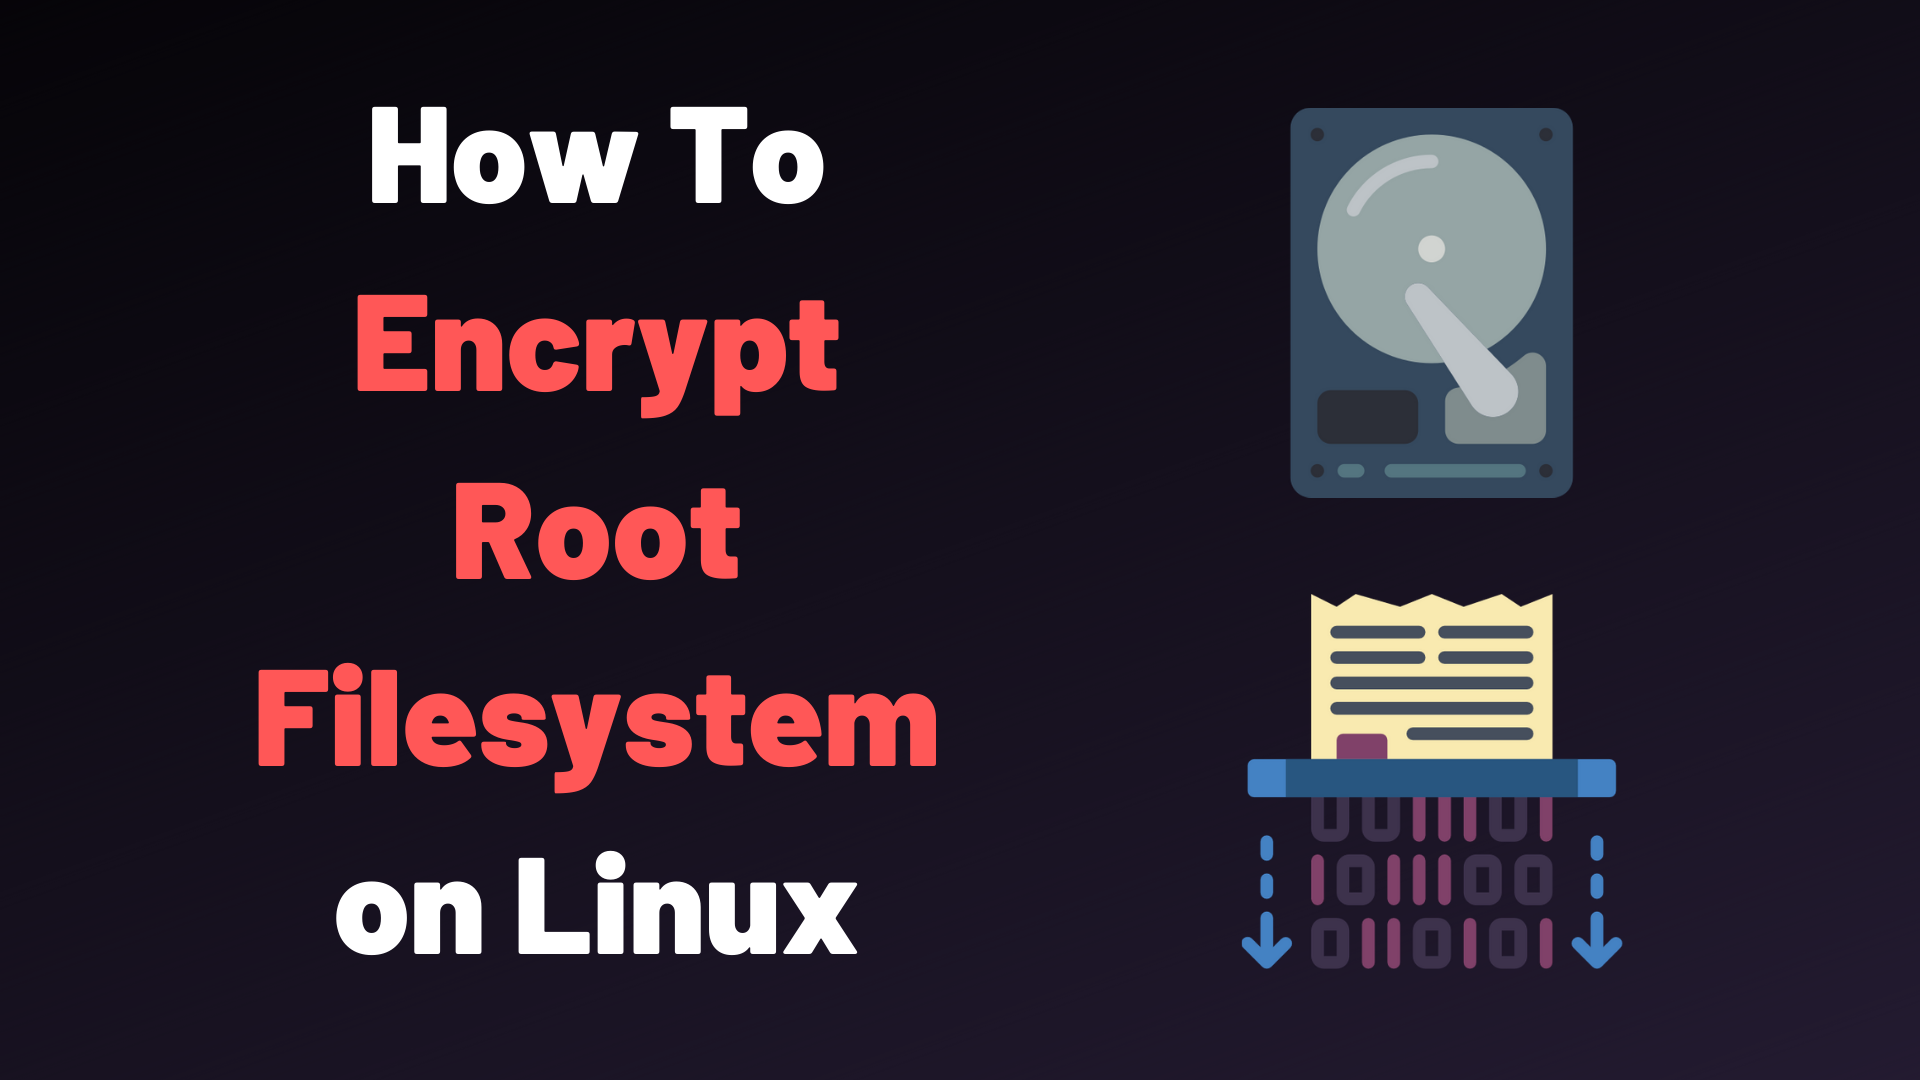 How To Encrypt Root Filesystem on Linux